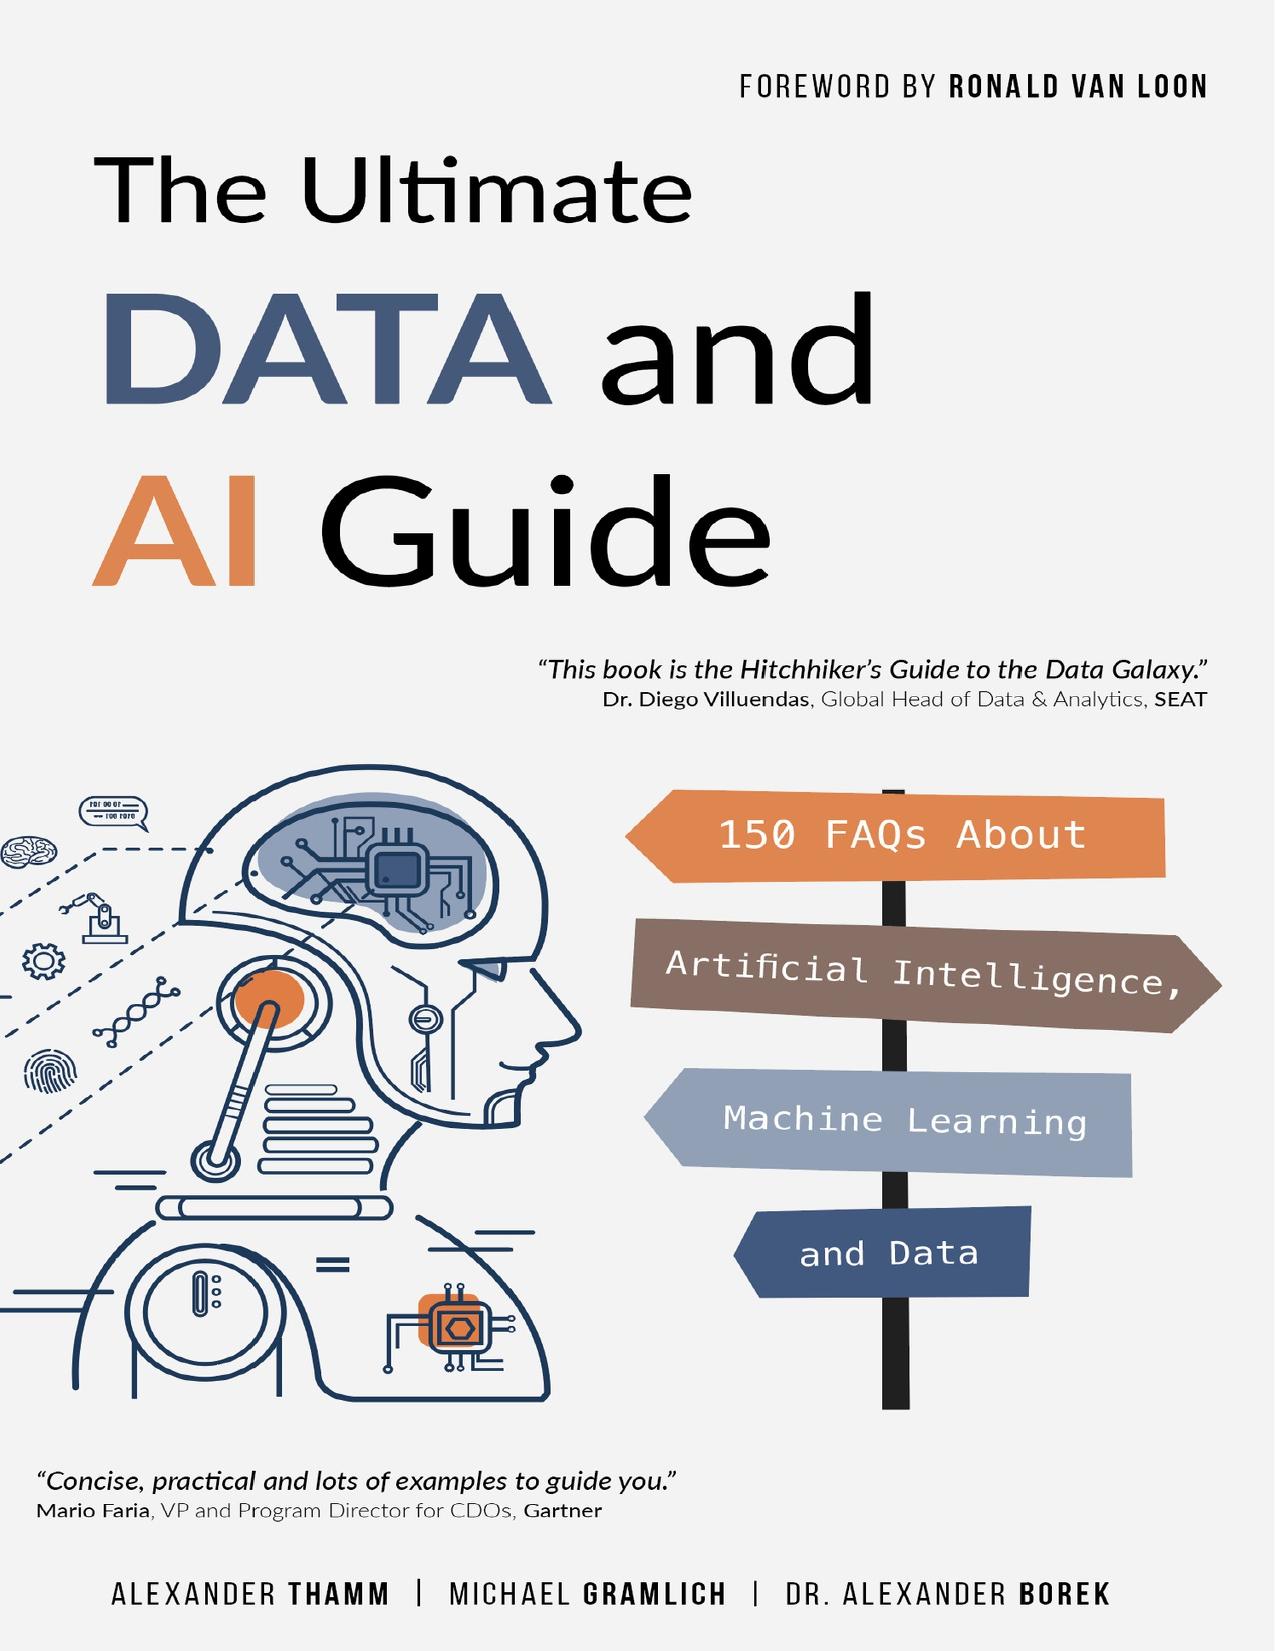 The Ultimate Data and AI Guide: 150FAQs About Artificial Intelligence, Machine Learning and Data